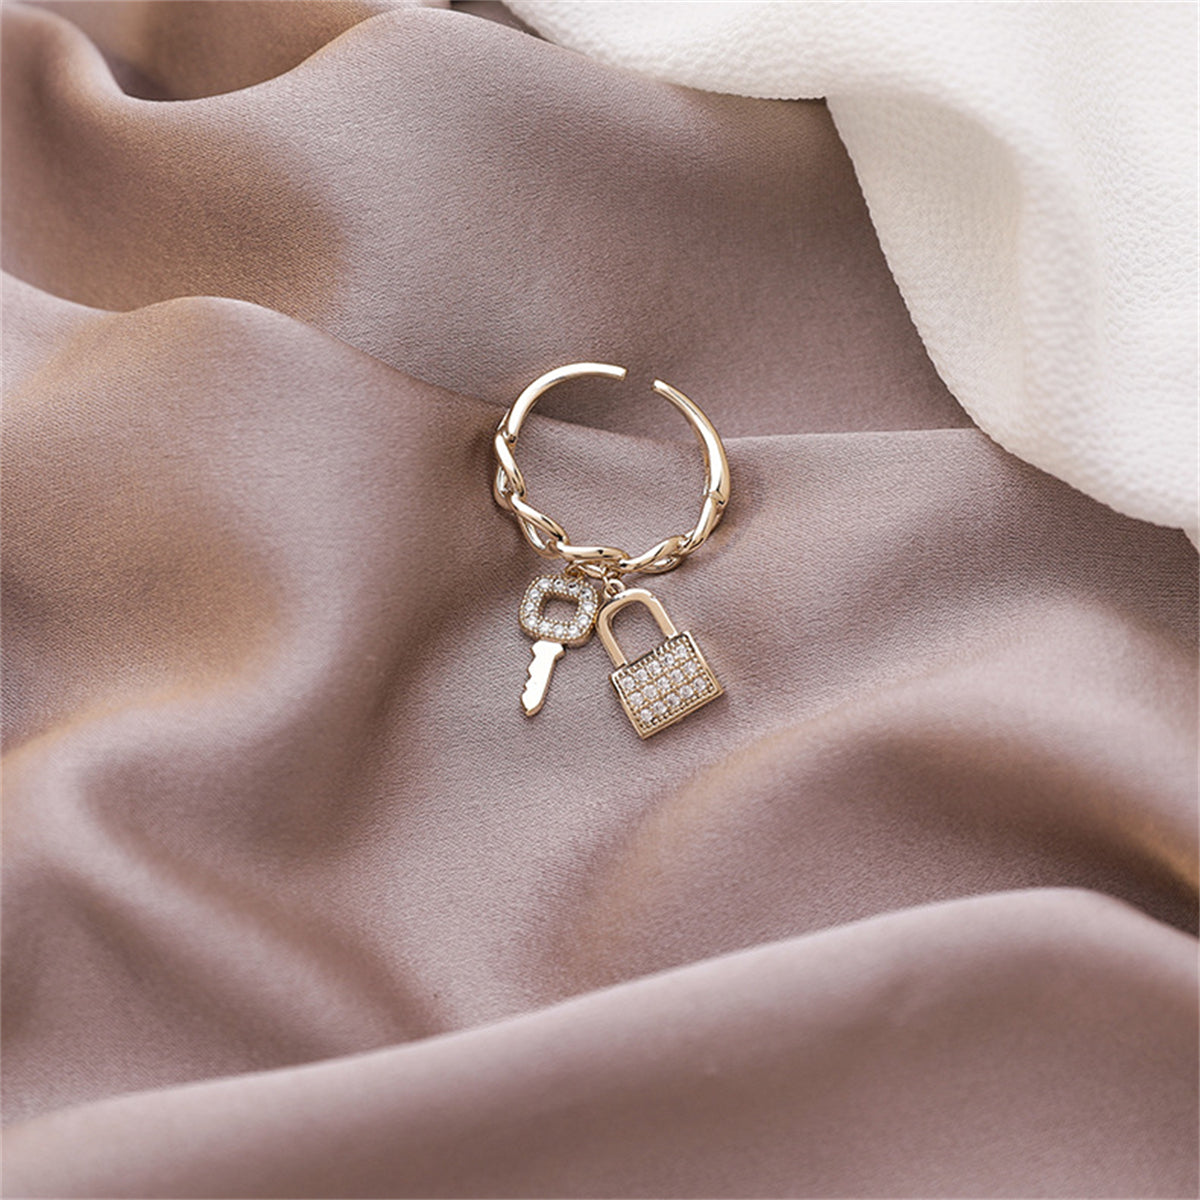 Cubic Zirconia & 18K Gold-Plated Key & Lock Charm Open Ring